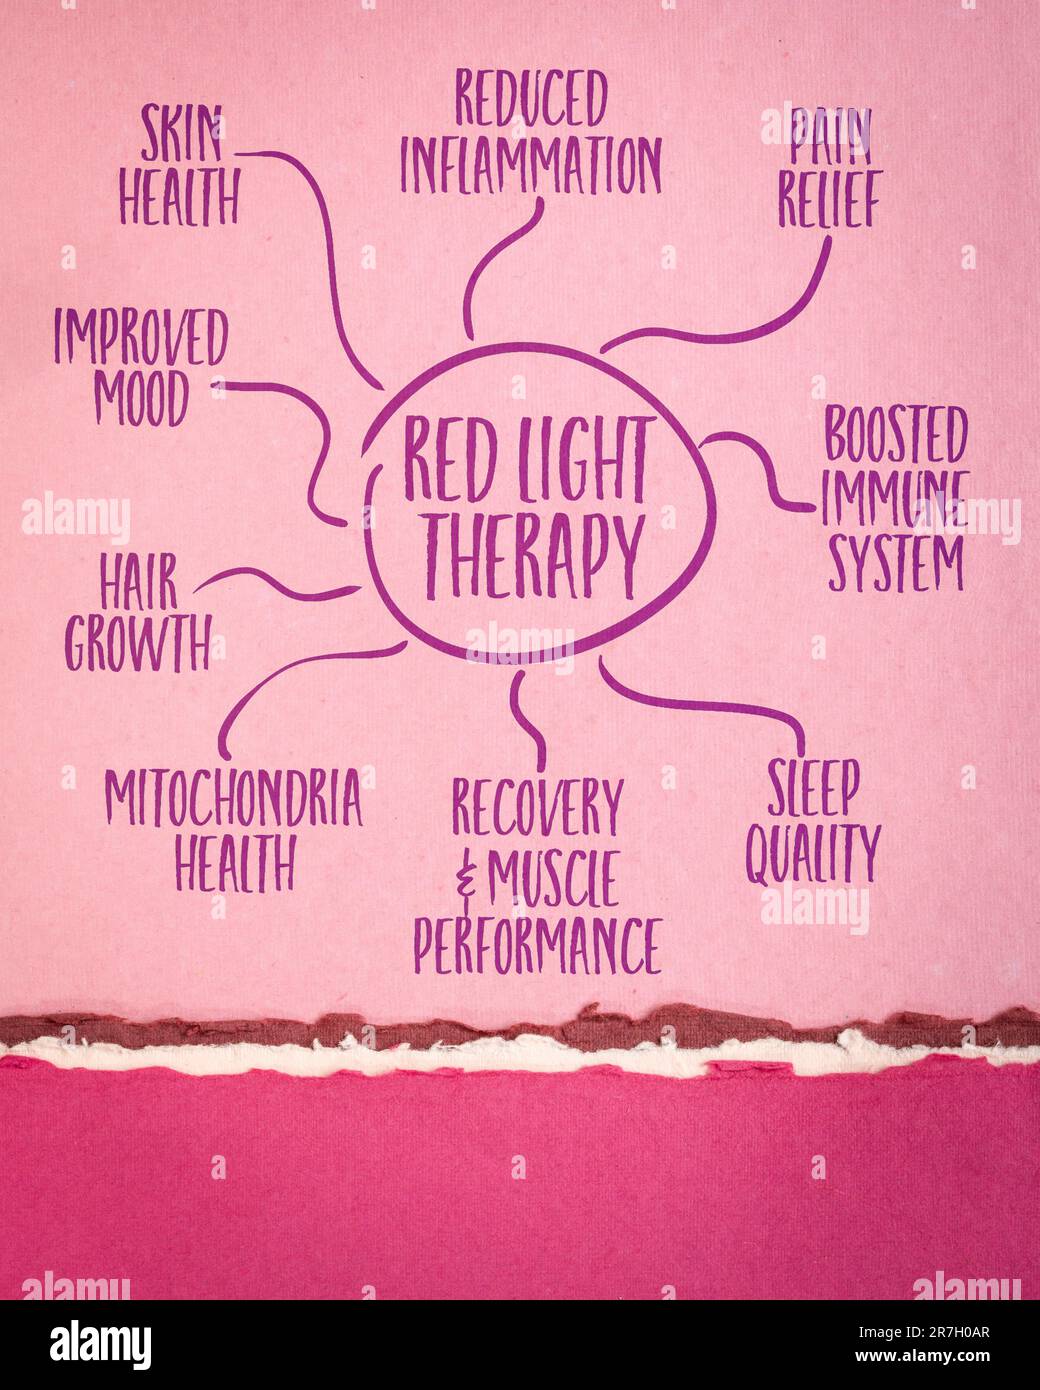 health benefits of red light therapy - mind map sketch on art paper, health and medical infographics Stock Photo